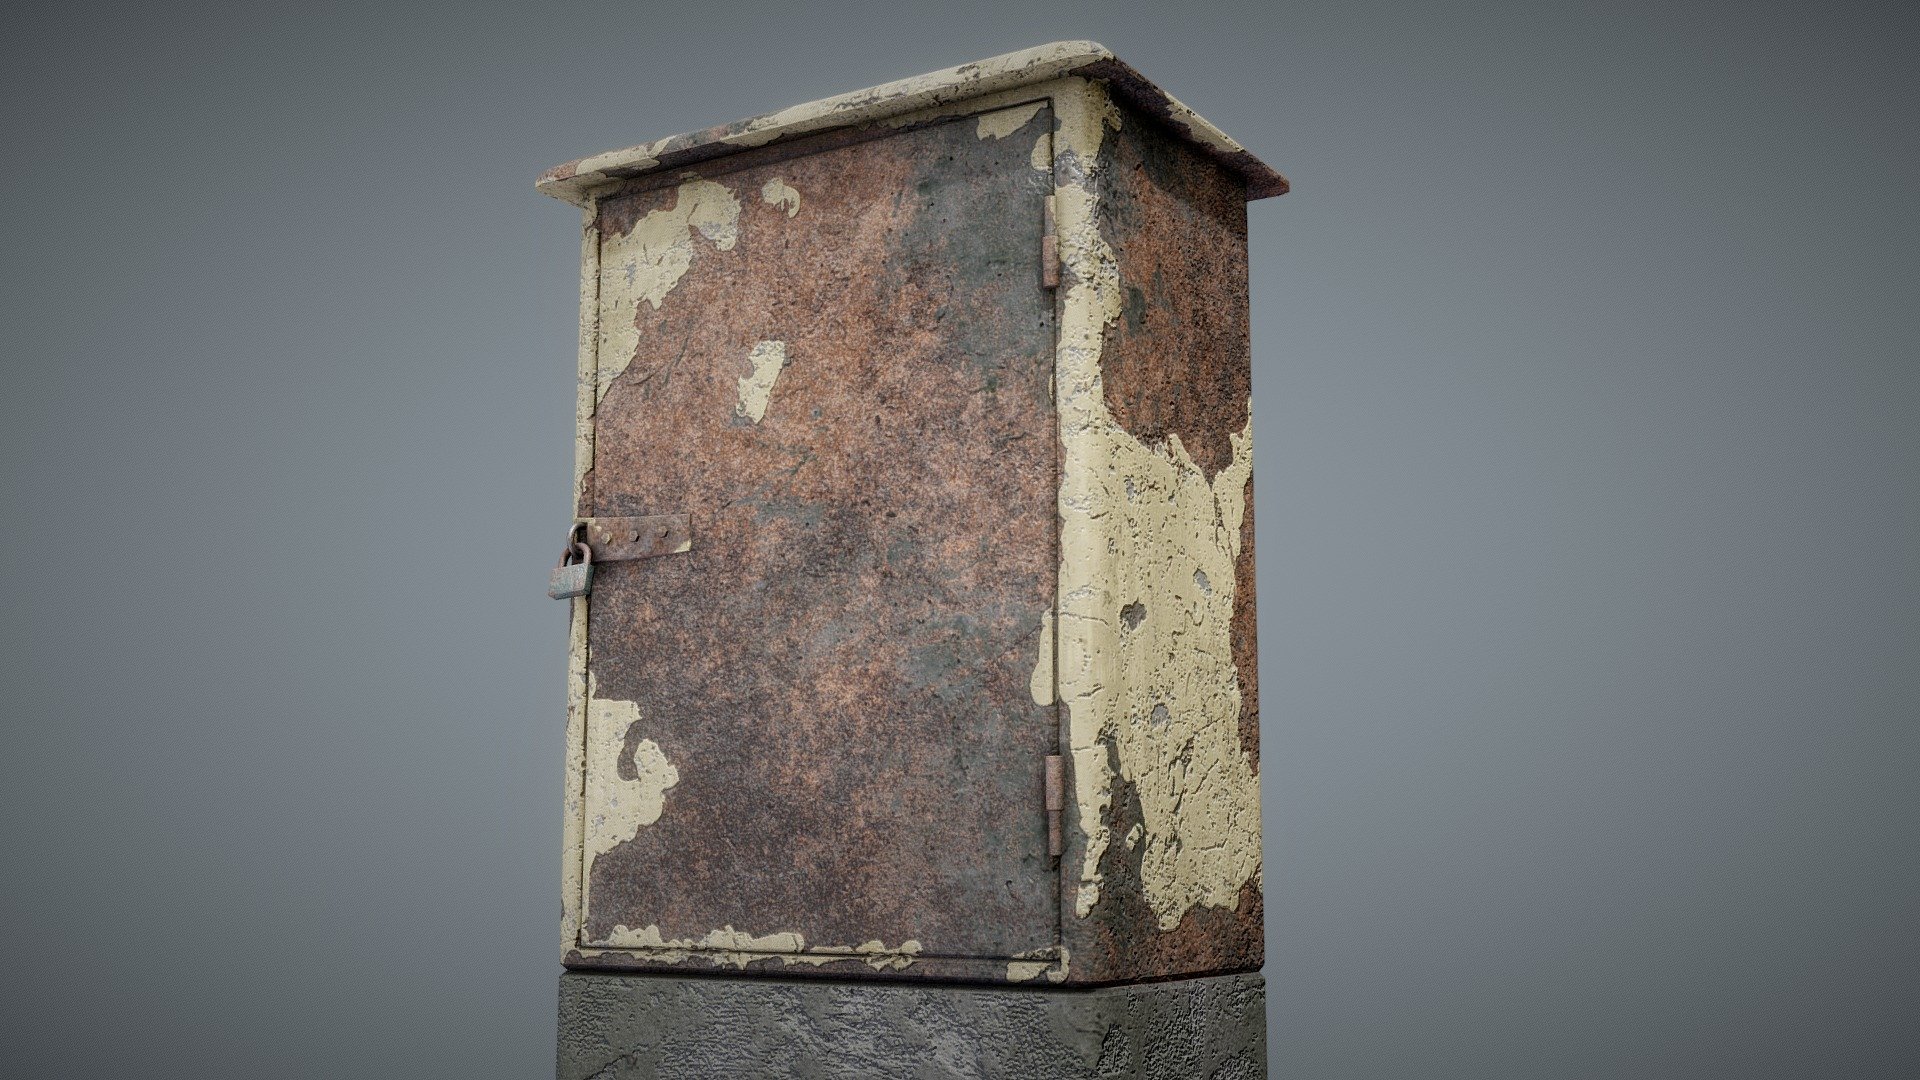 Rusty electrical box 3D asset - game-ready - highpoly on lowpoly - inspired by IR object - modeled with Blender 2.80, textured carefully with Substance Painer. 4 parented mesh objects, single material.
Metric units. H=1m 

LODS
LOD0:
Verts: 476 Tris: 850
LOD1: 
Verts: 268 Tris: 454
You can find LODs in separate archives in fbx. and obj. format.

Textures
2K Textures in 3 different formats. (although renders were done using 2k textures - they look good enough) 
PBR metallic roughness: BaseColor, AO, Metallic, Roughness, Normal, Height. 
Unity 5: AlbedoTransparency, AO, MetallicSmoothness, Normal, Emission
Unreal Engine 4: BaseColor, Normal, Emission, OcclussionRoughnessMetallic

Attention
Please note that blend., fbx., obj., stl. files contains only clear mesh model without textures. Textures are stored in a separate ZIP archives and have to be manually applied 3d model